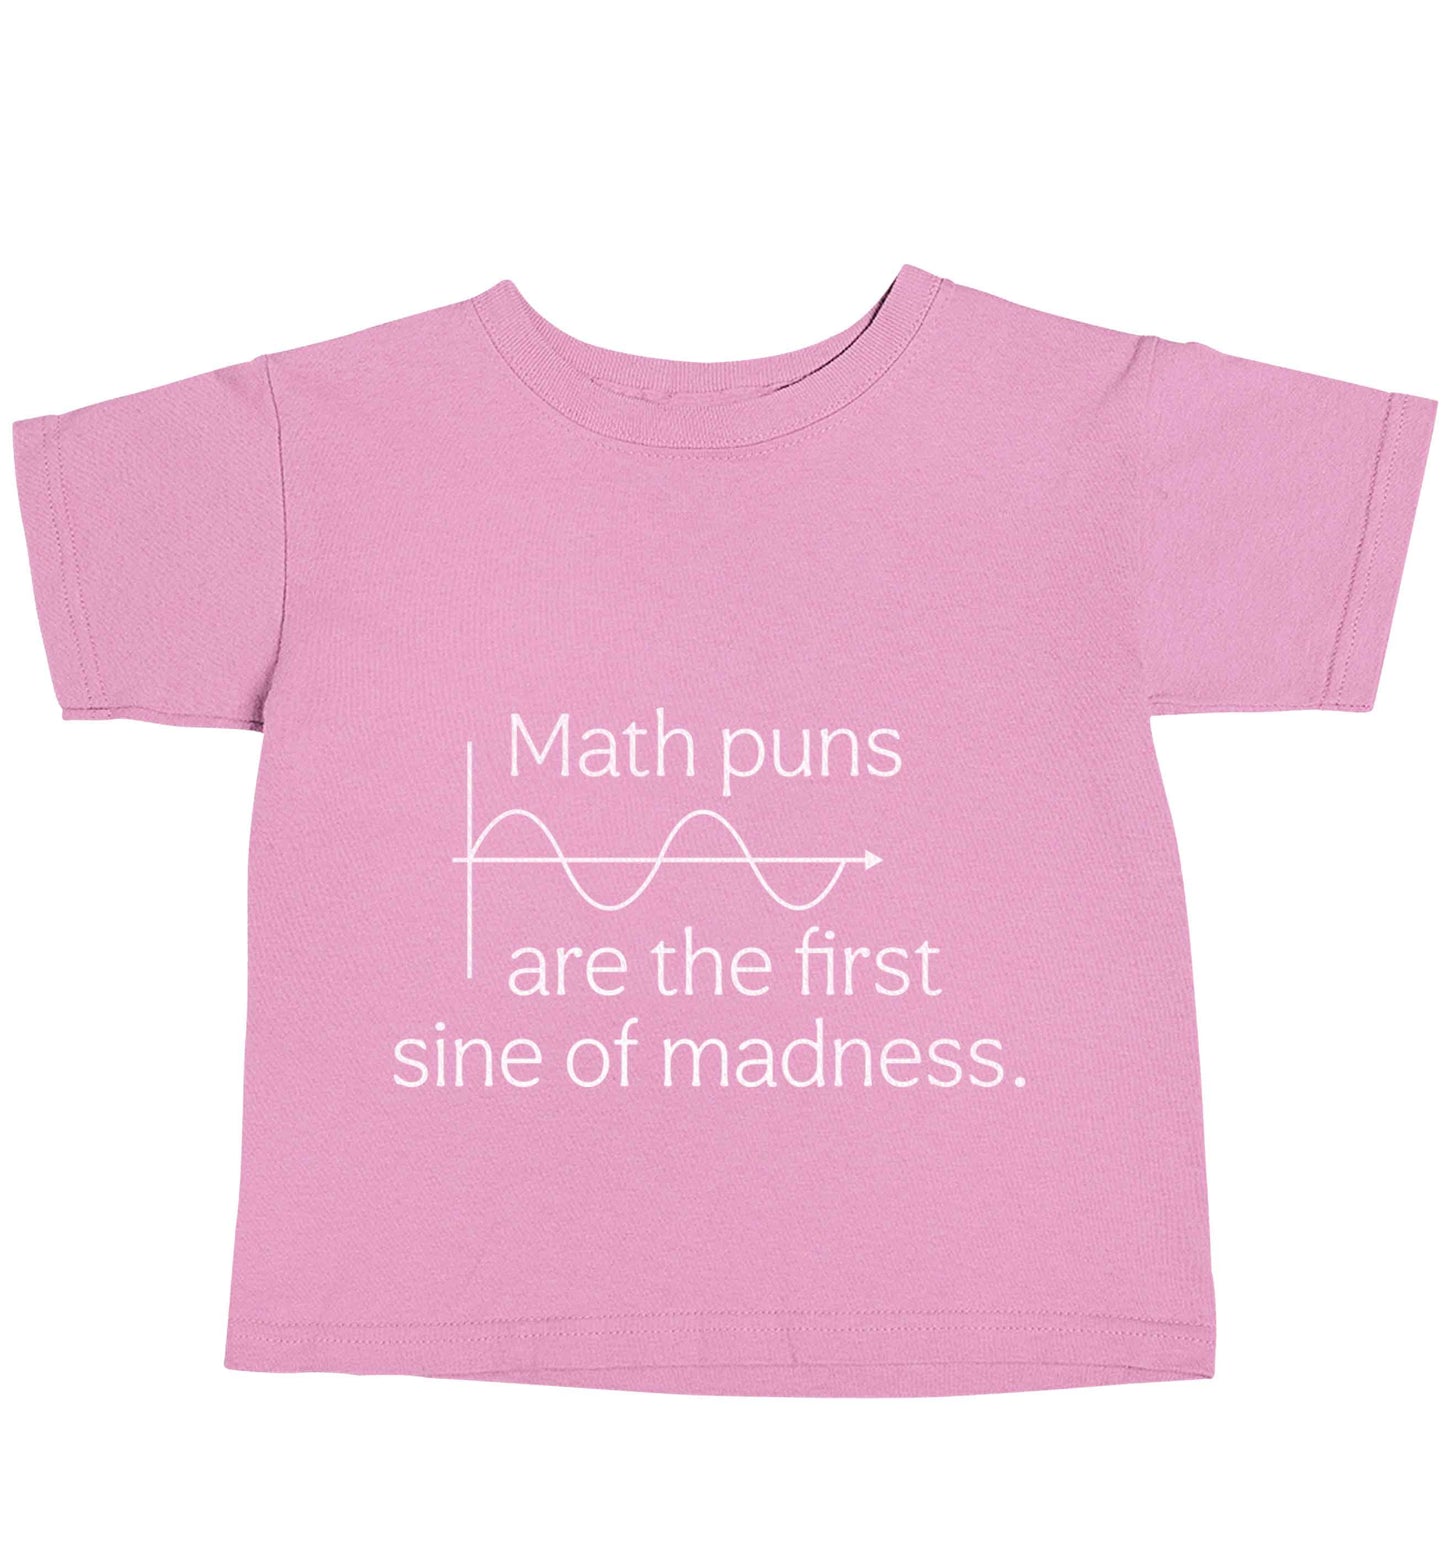 Math puns are the first sine of madness light pink baby toddler Tshirt 2 Years